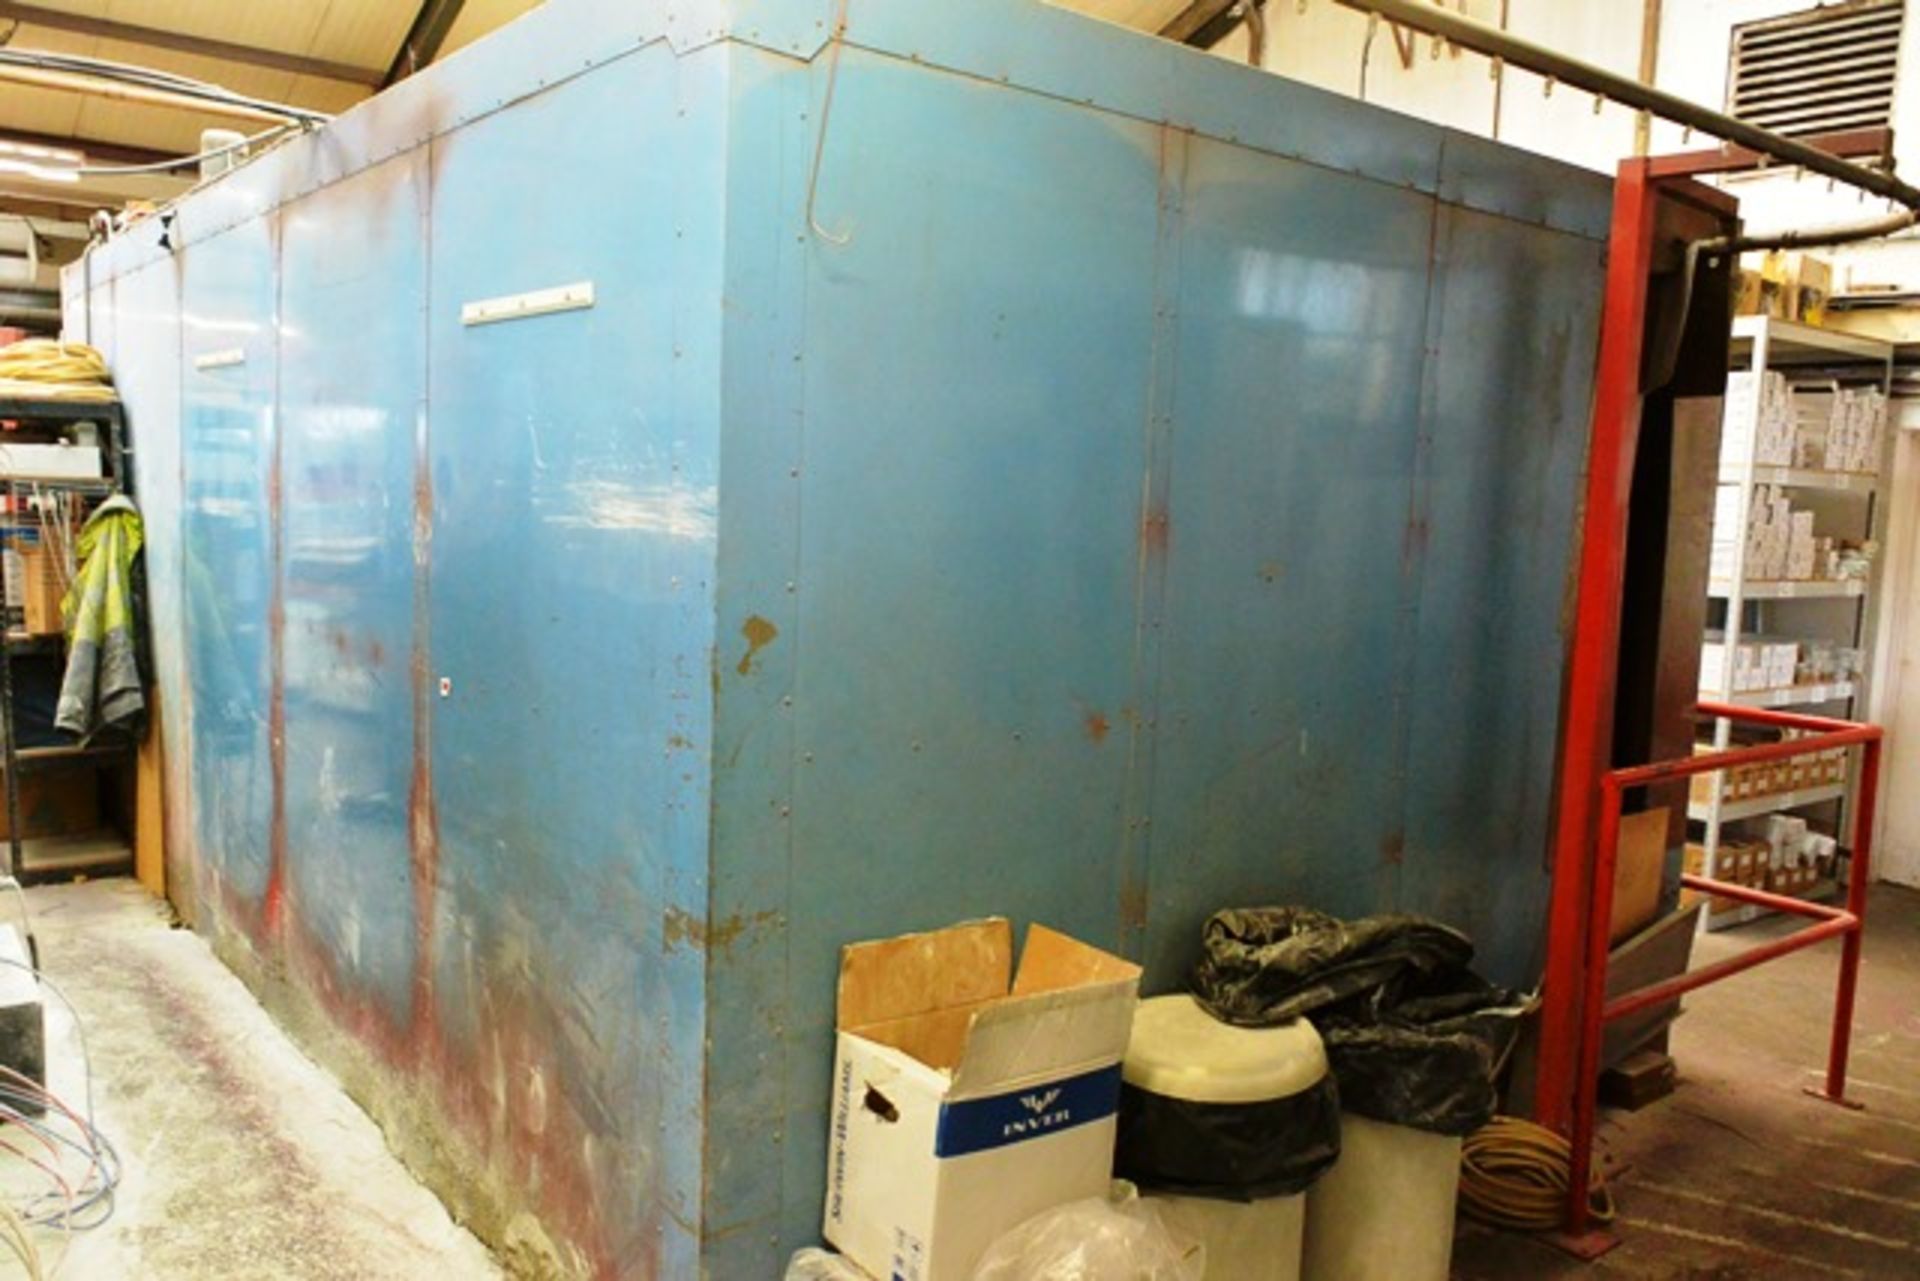 Airflow Product Finishing throughfeed 2-pass drying/curing oven, approx 6 x 3m, with twin ceiling - Image 3 of 5